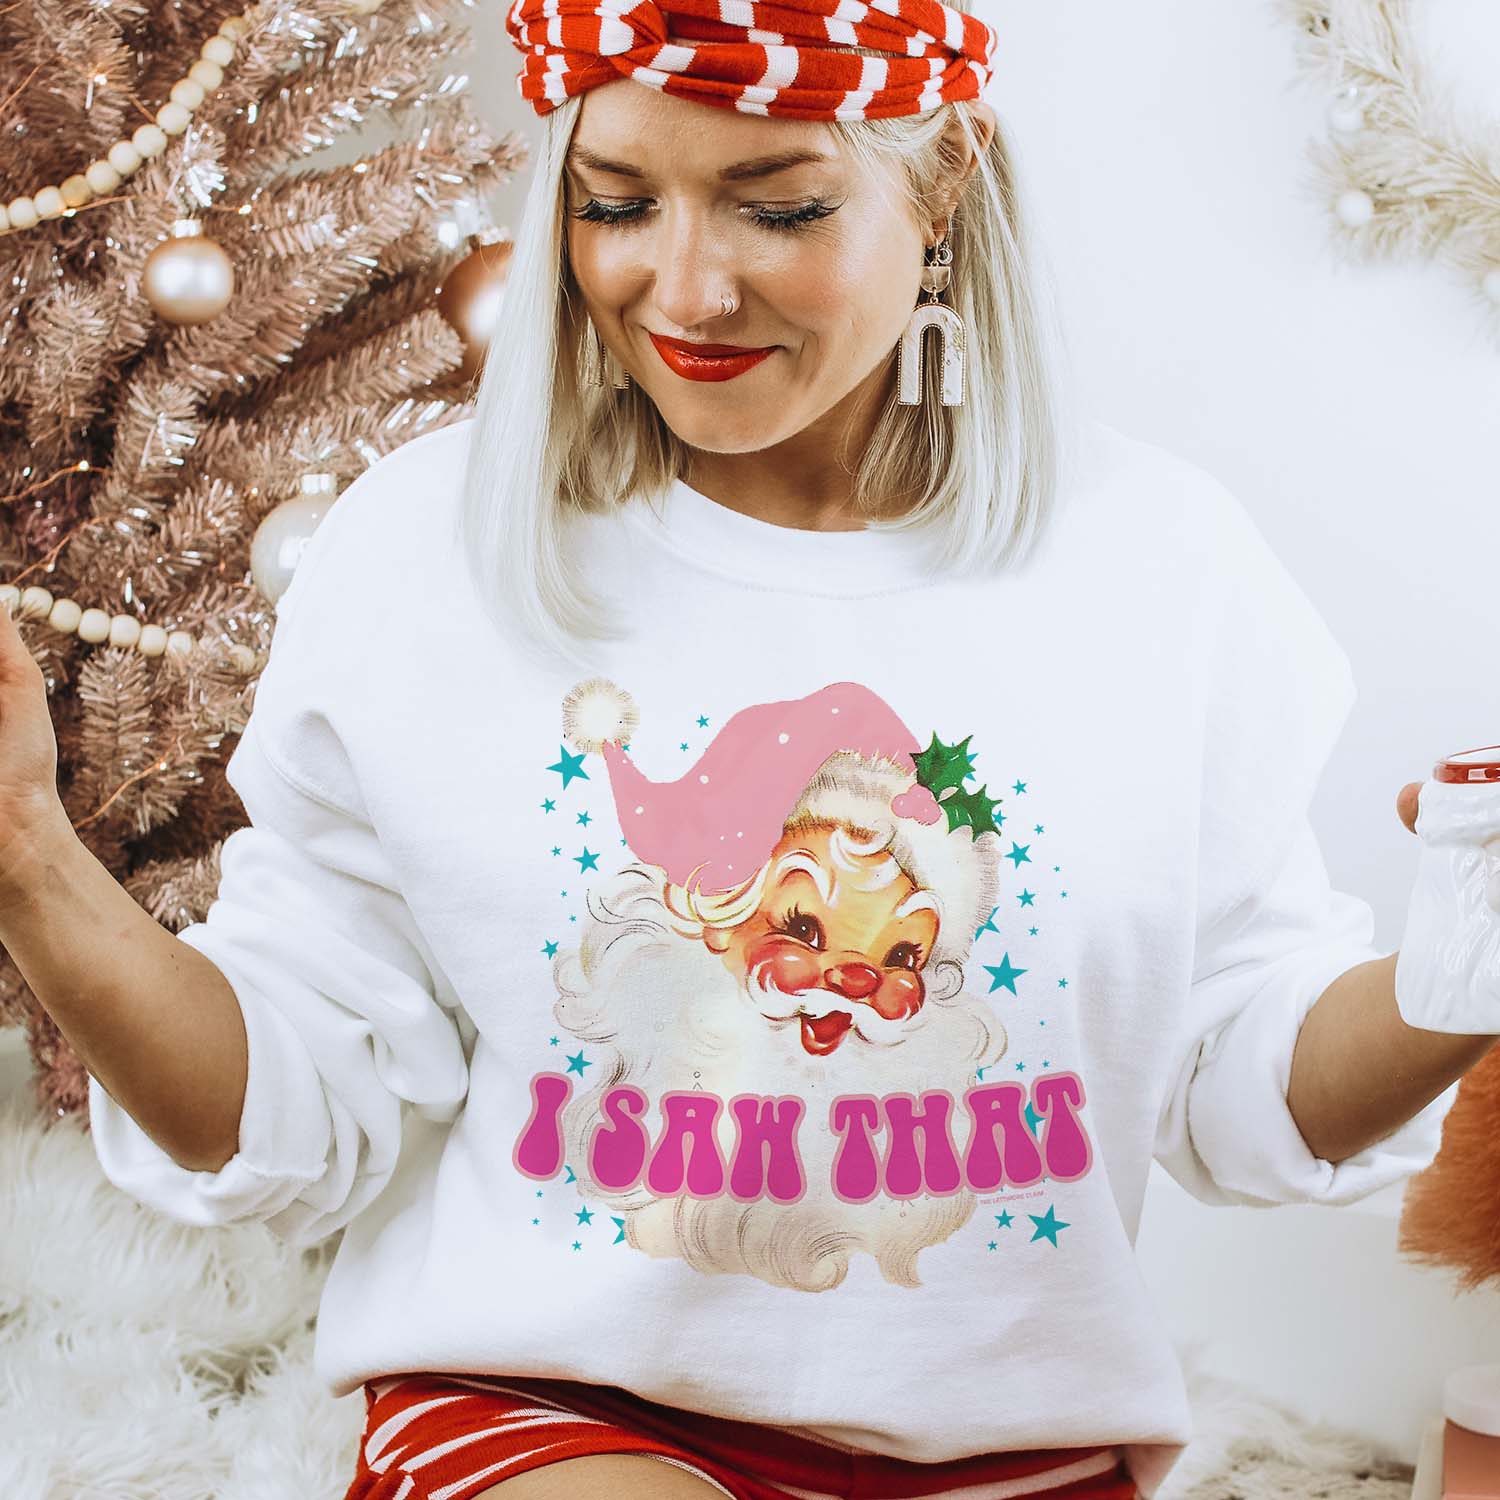 This white sweatshirt includes a crew neckline, long sleeves, and a hand drawn graphic of a vintage Santa Clause with rosy cheeks wearing a light pink hat. There are blue stars around him of various sizes, along with the words "I SAW THAT" in a fun hot pink bubble font with light pink outline. This sweatshirt is shown here being modeled with a pair of red and white striped shorts and matching headband, along with a pair of white dangle earrings.  